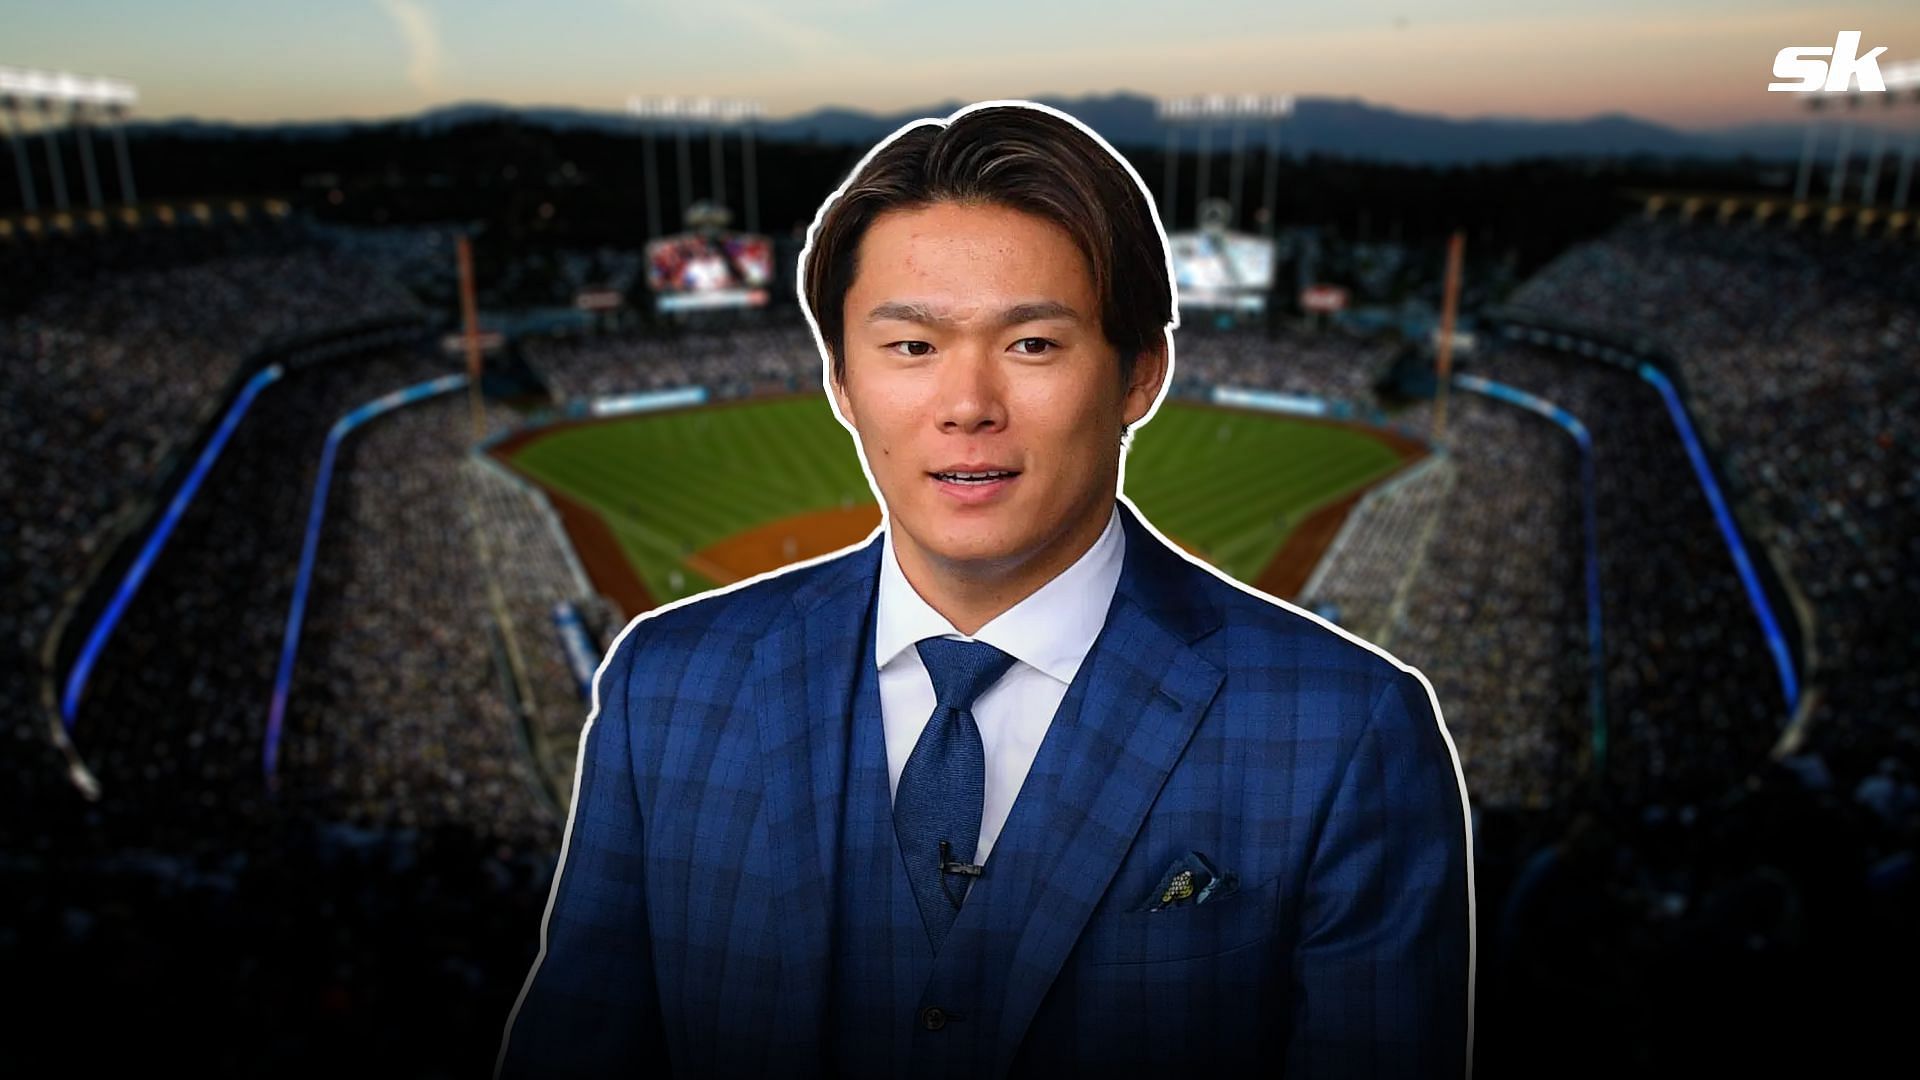 Yoshinobu Yamamoto stuns the fans with his All-Black look as he enters the Dodgers Stadium